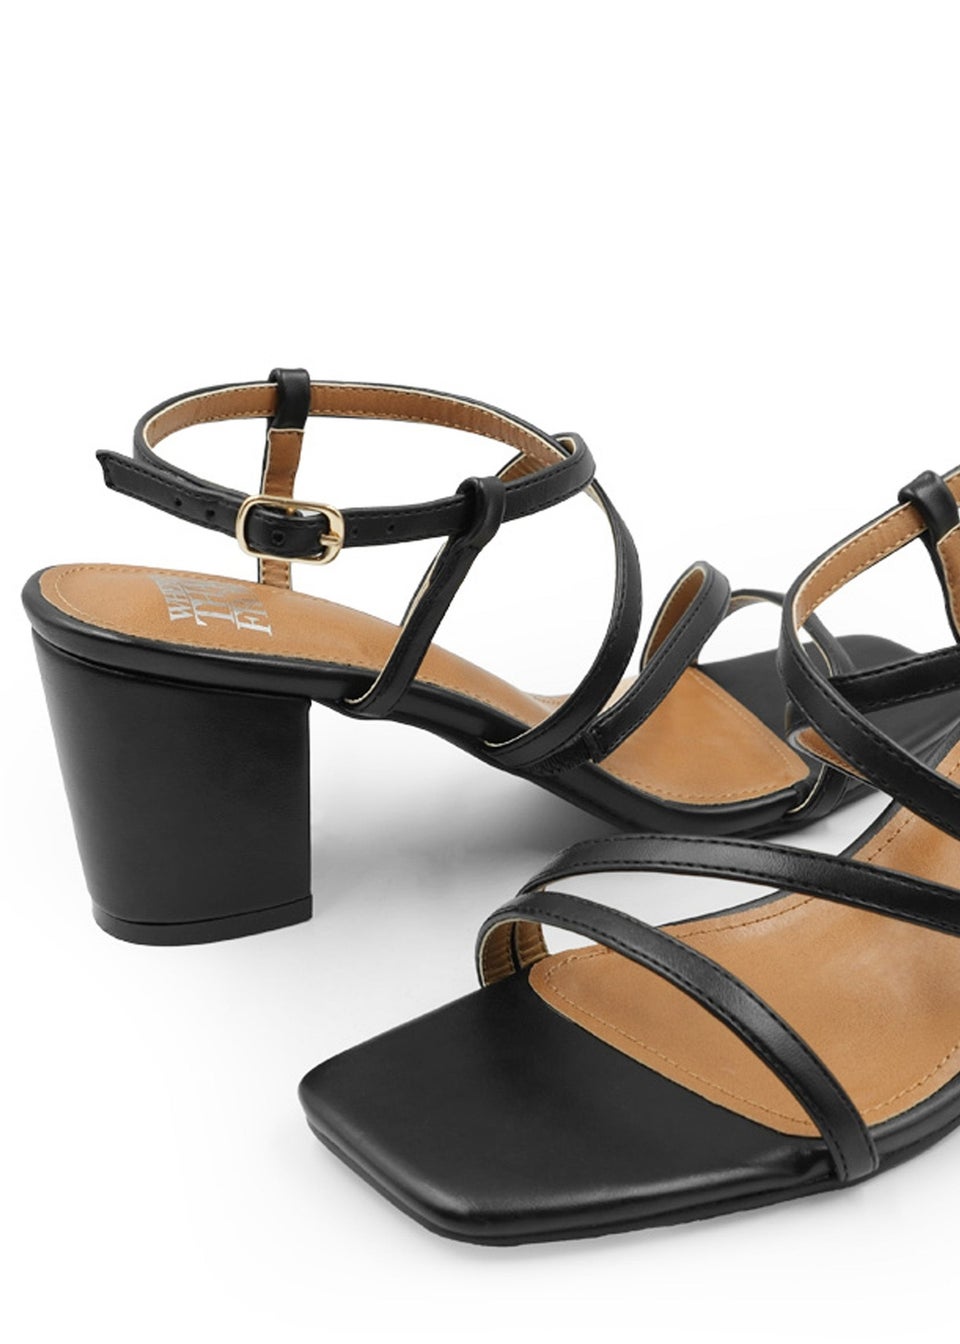 Where's That From Black Sidra Extra Wide Mid PU Sandals